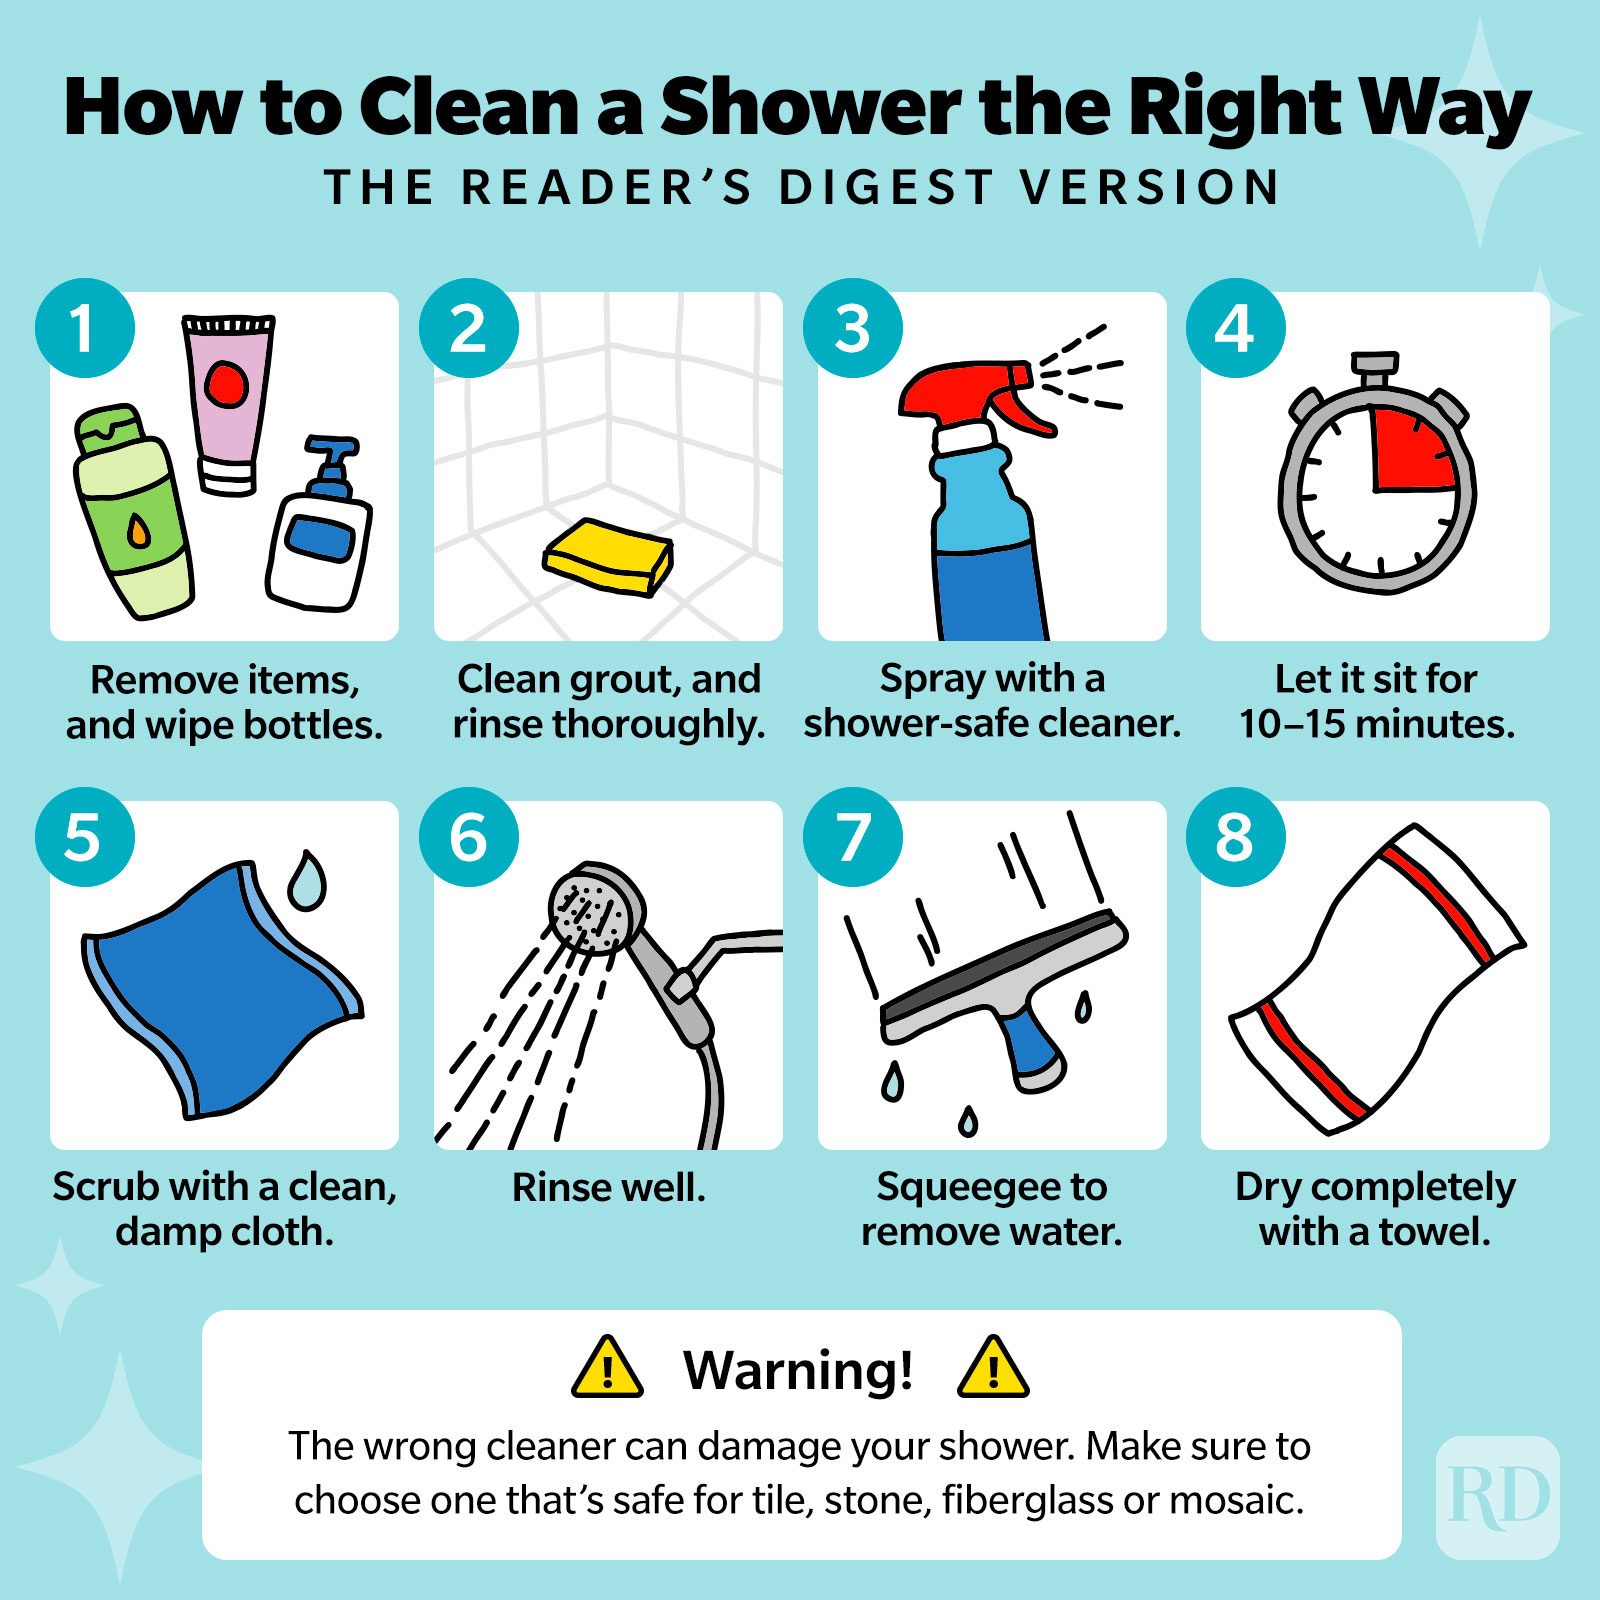 https://www.rd.com/wp-content/uploads/2023/03/How-to-Clean-a-Shower-the-Right-Way-Infographic.jpg?fit=680%2C680